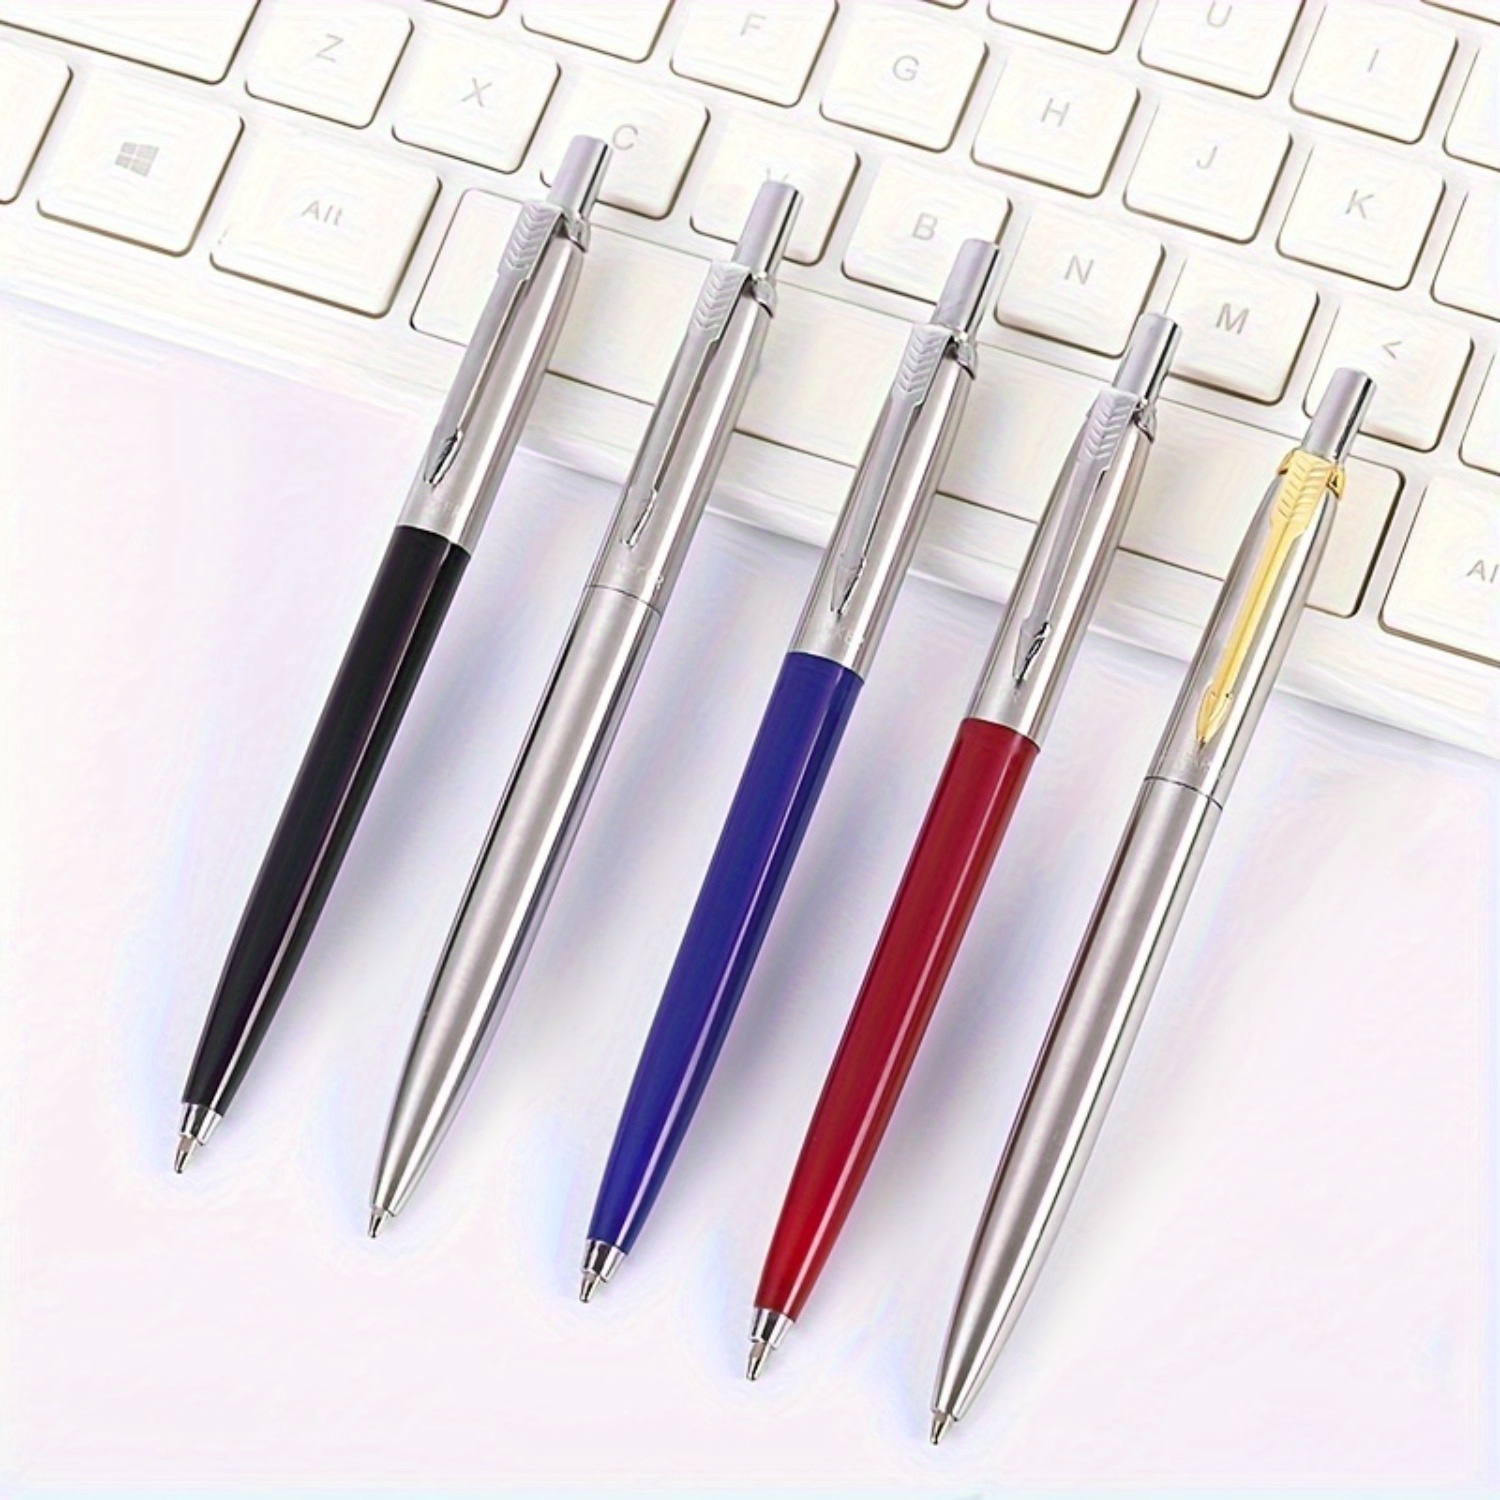 

5-piece Luxury Metal Ballpoint Pens | Retractable, Smooth Writing With Comfort Grip | Elegant Design For Professionals